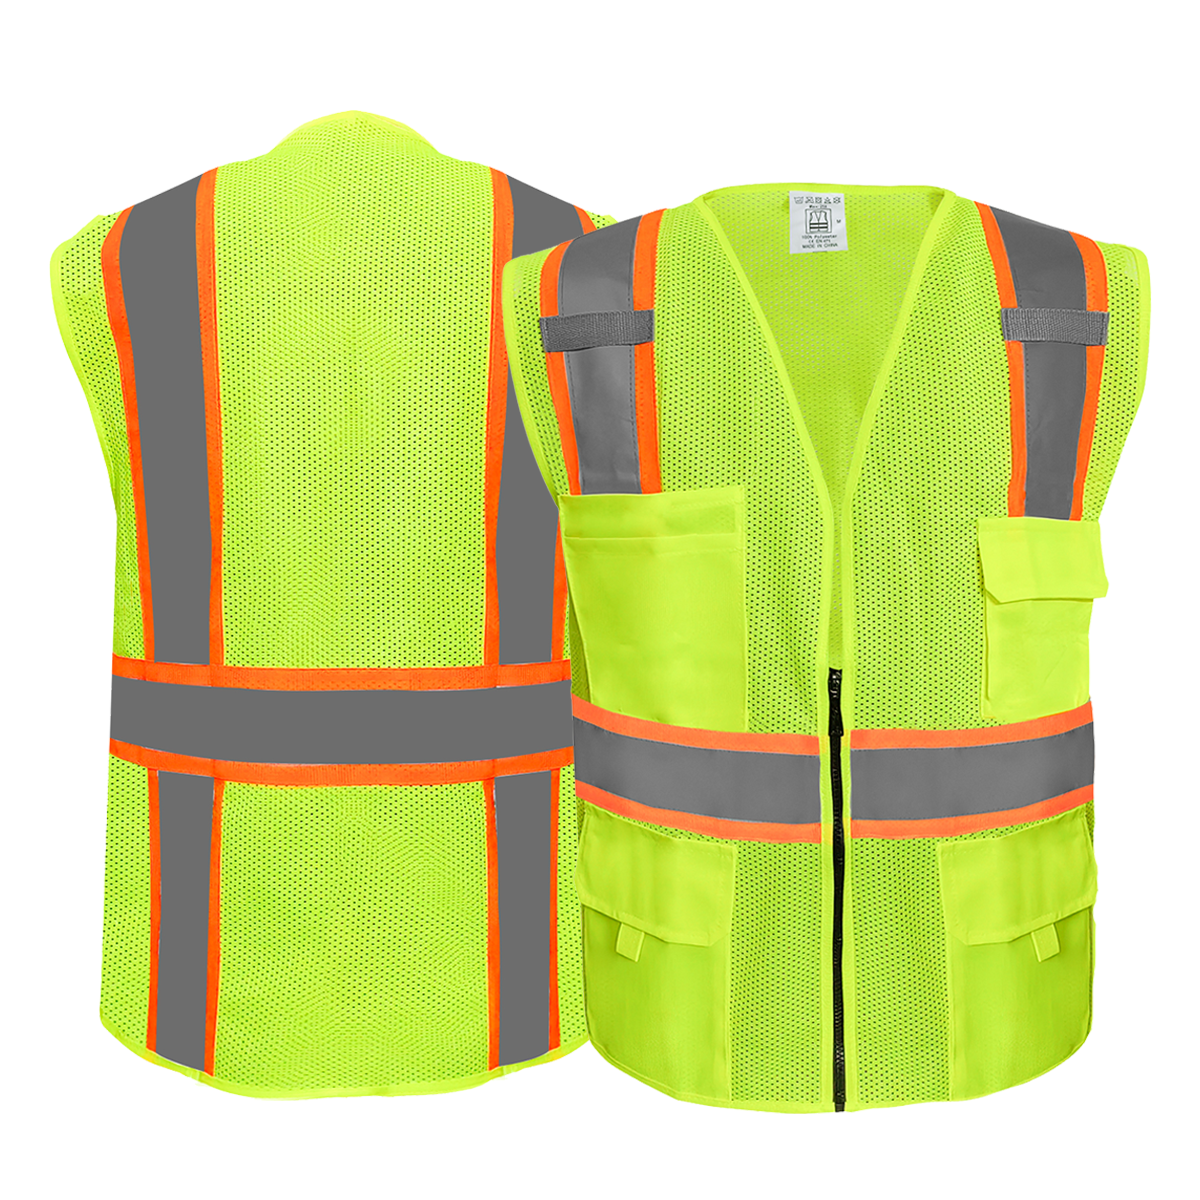 yellow safety vest with orange edging